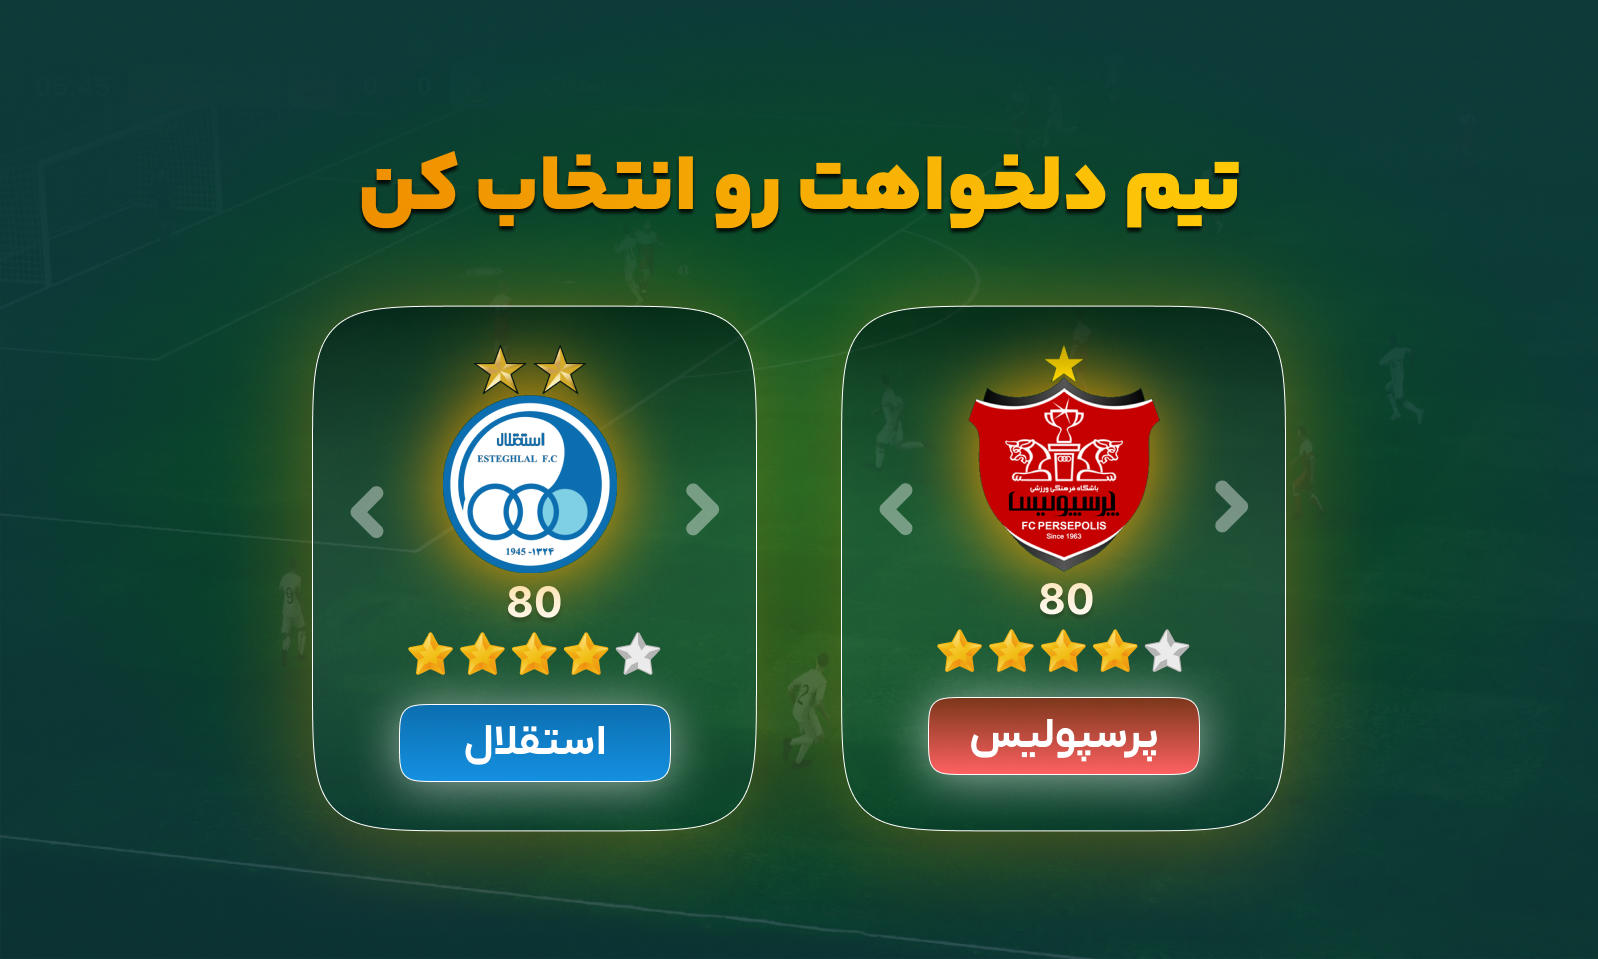 Middle East soccer(mes) screenshot game